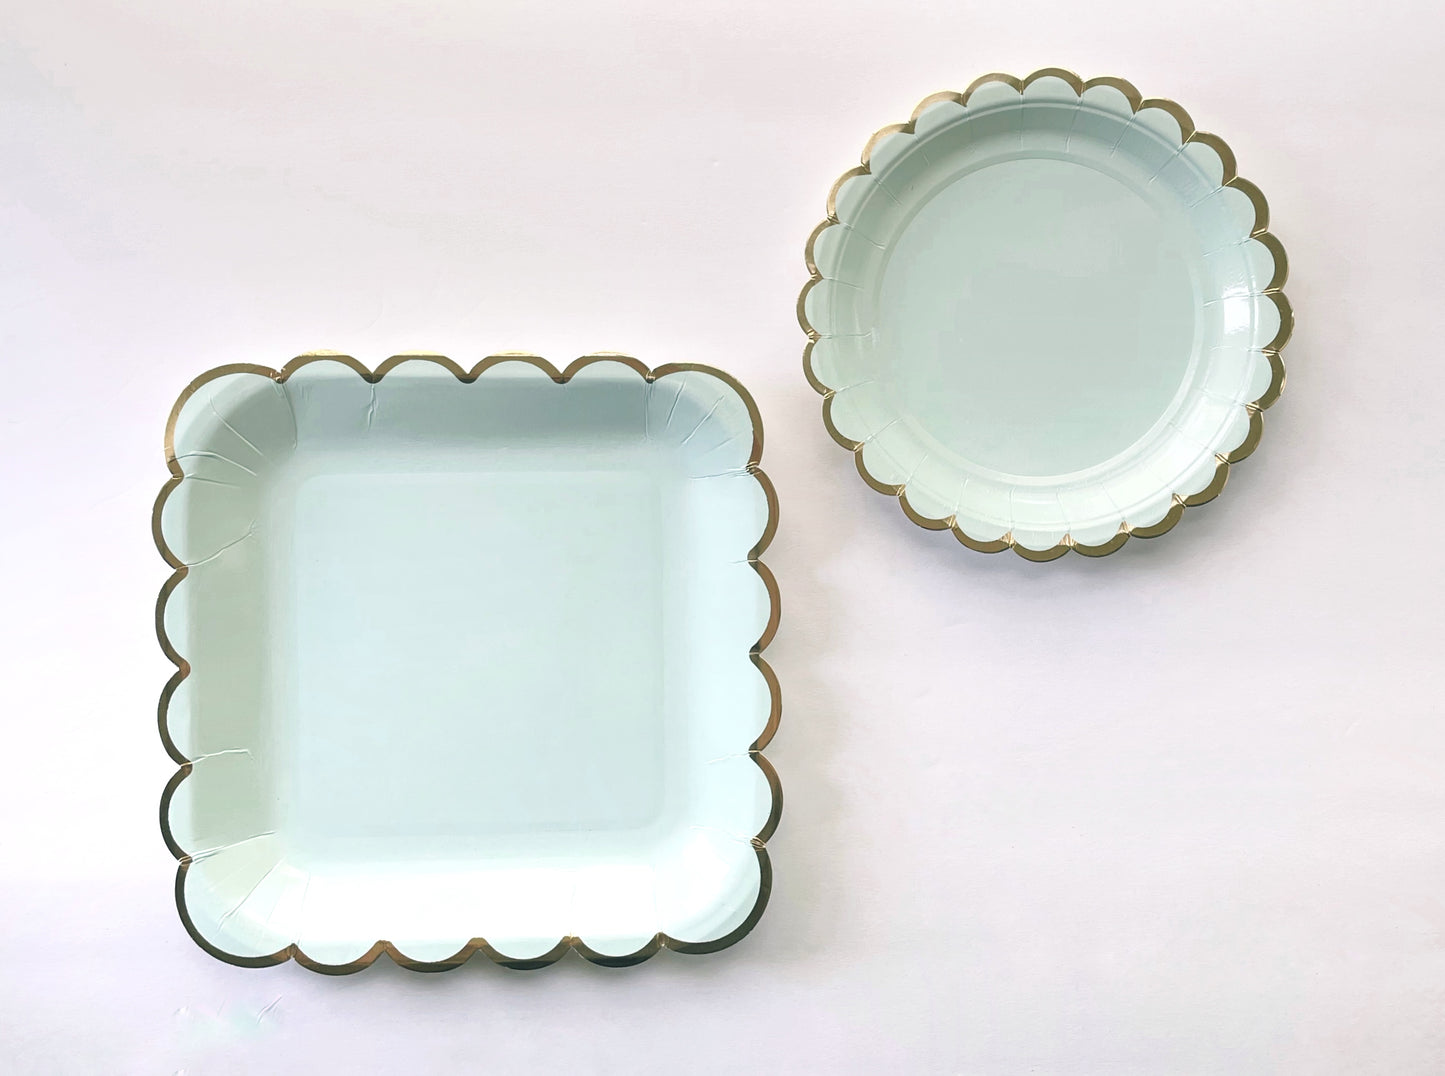 The large and small paper party plates. The plates are a pale pastel blue colour with gold foil scalloped trim.